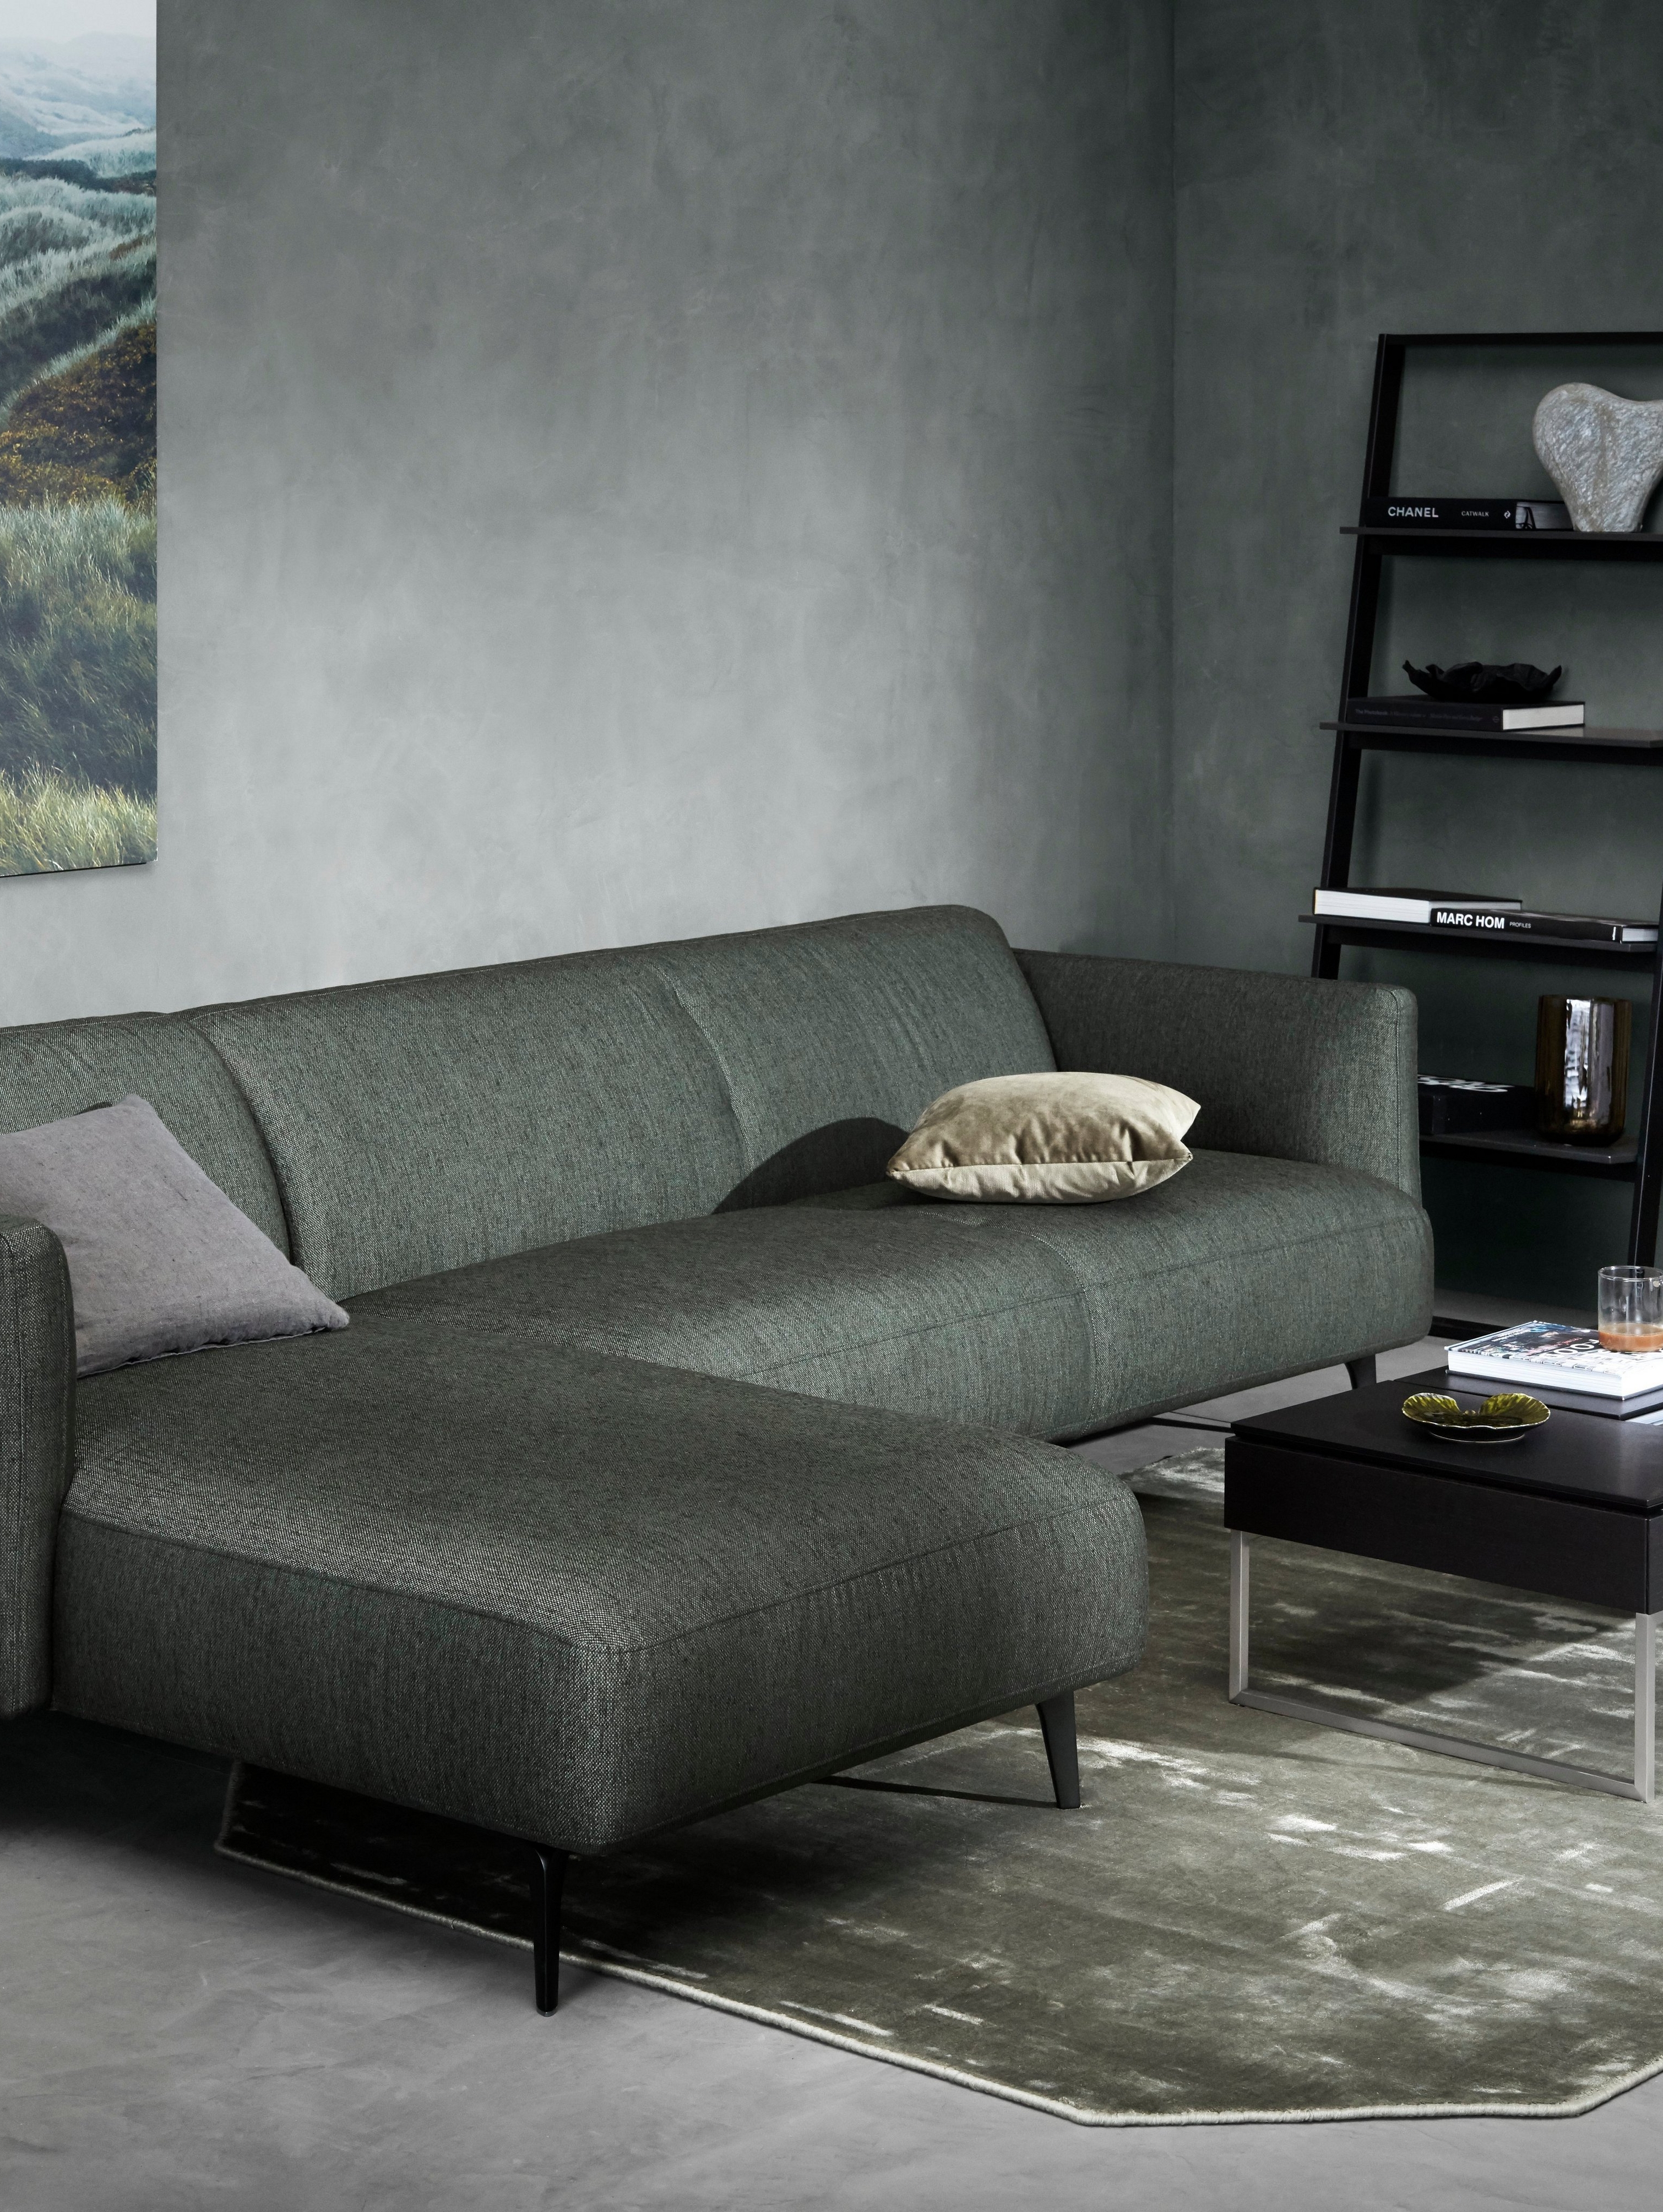 The Modena sofa with resting unit in dark green Bristol inside a muted green painted room.